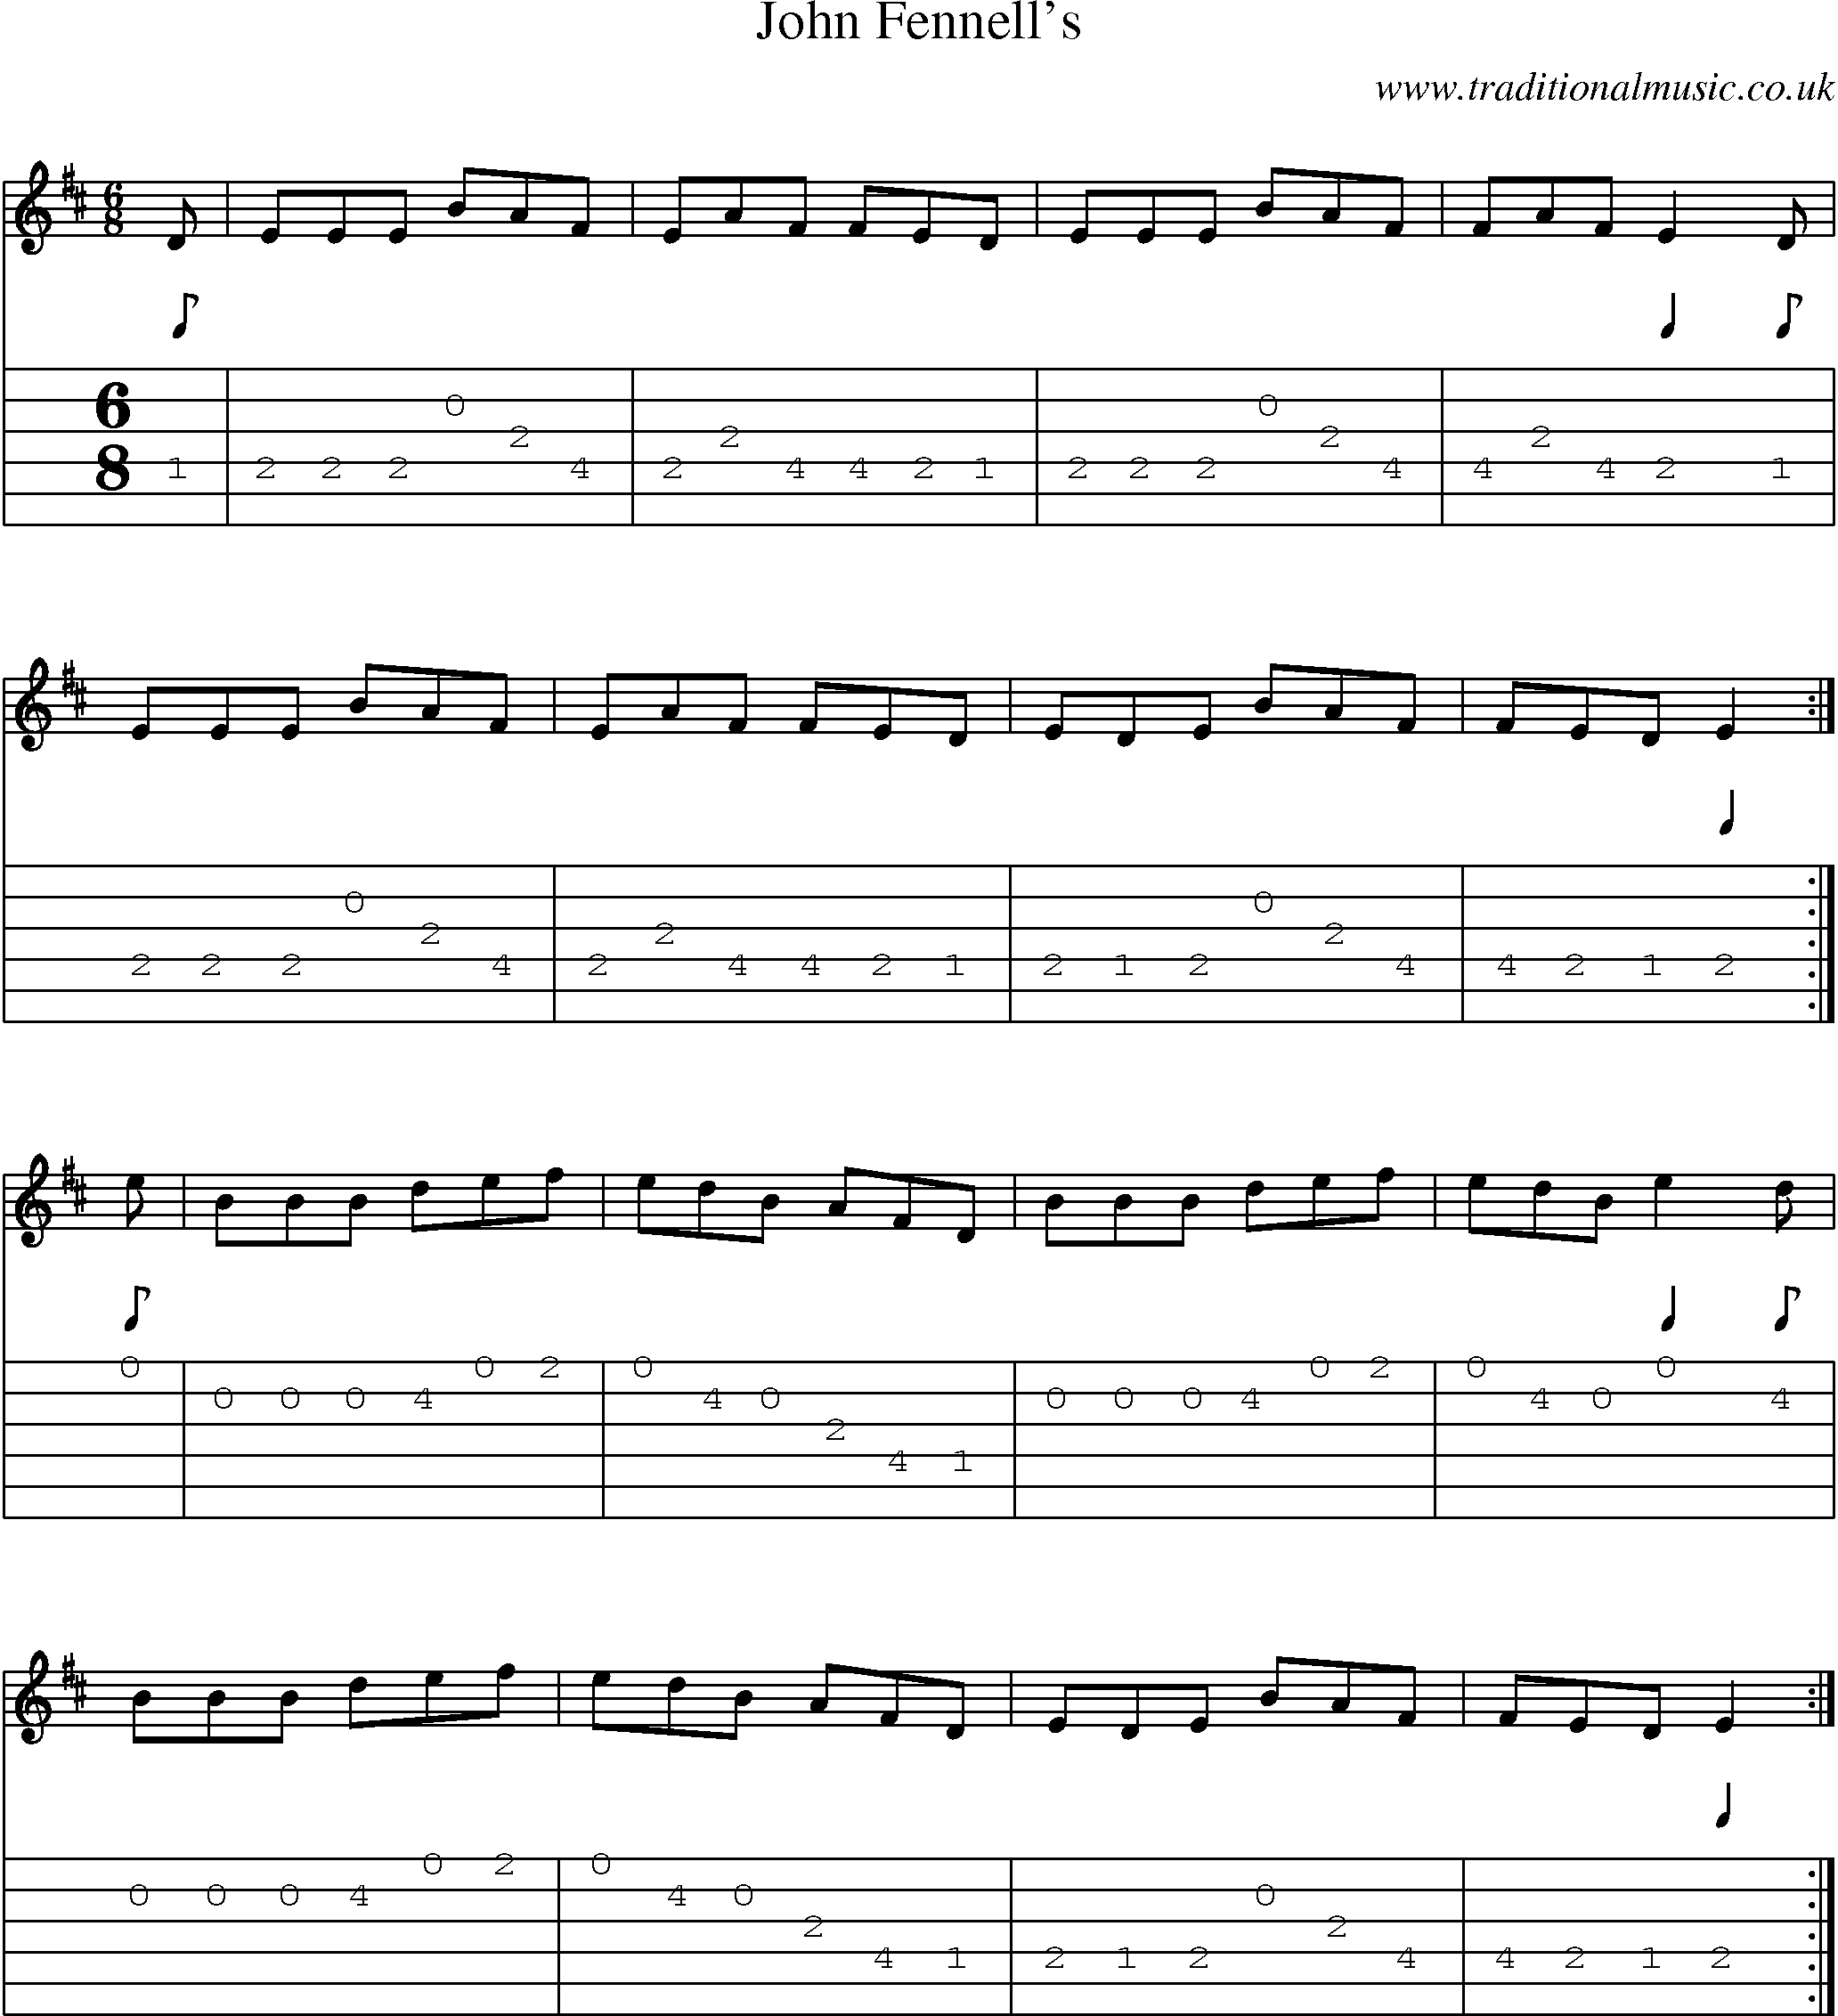 Music Score and Guitar Tabs for John Fennells